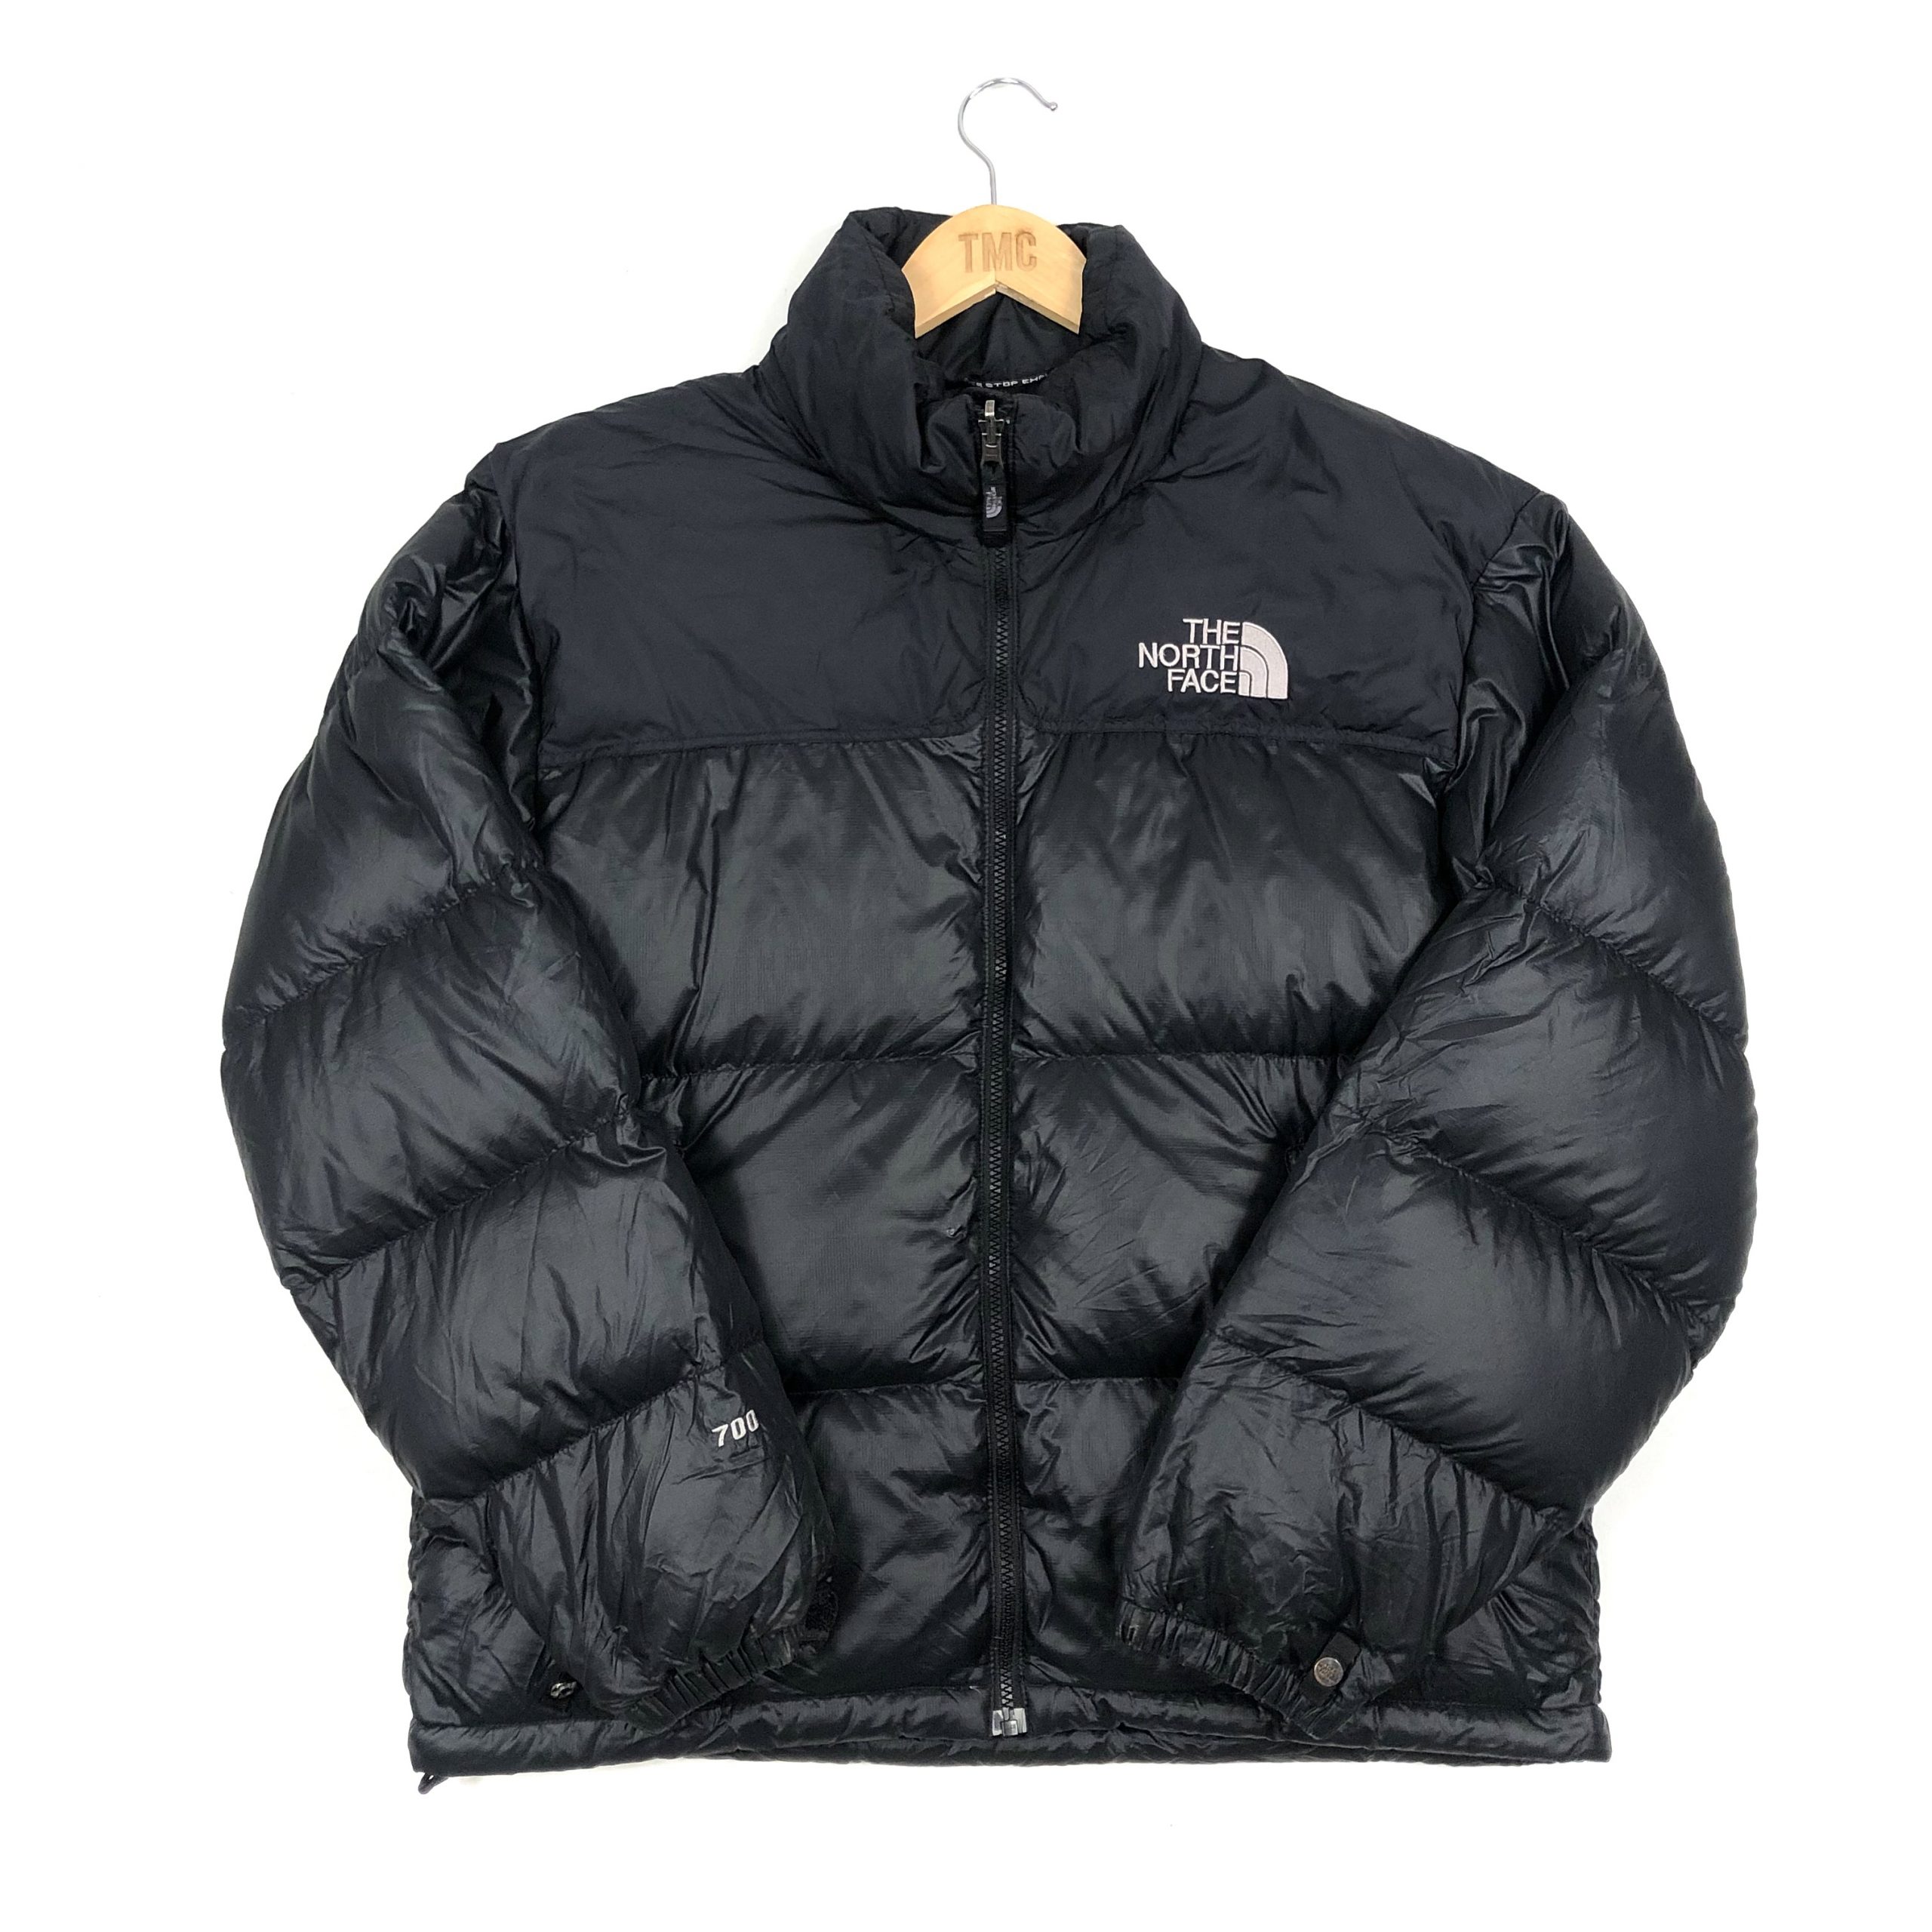 The north face down jacket